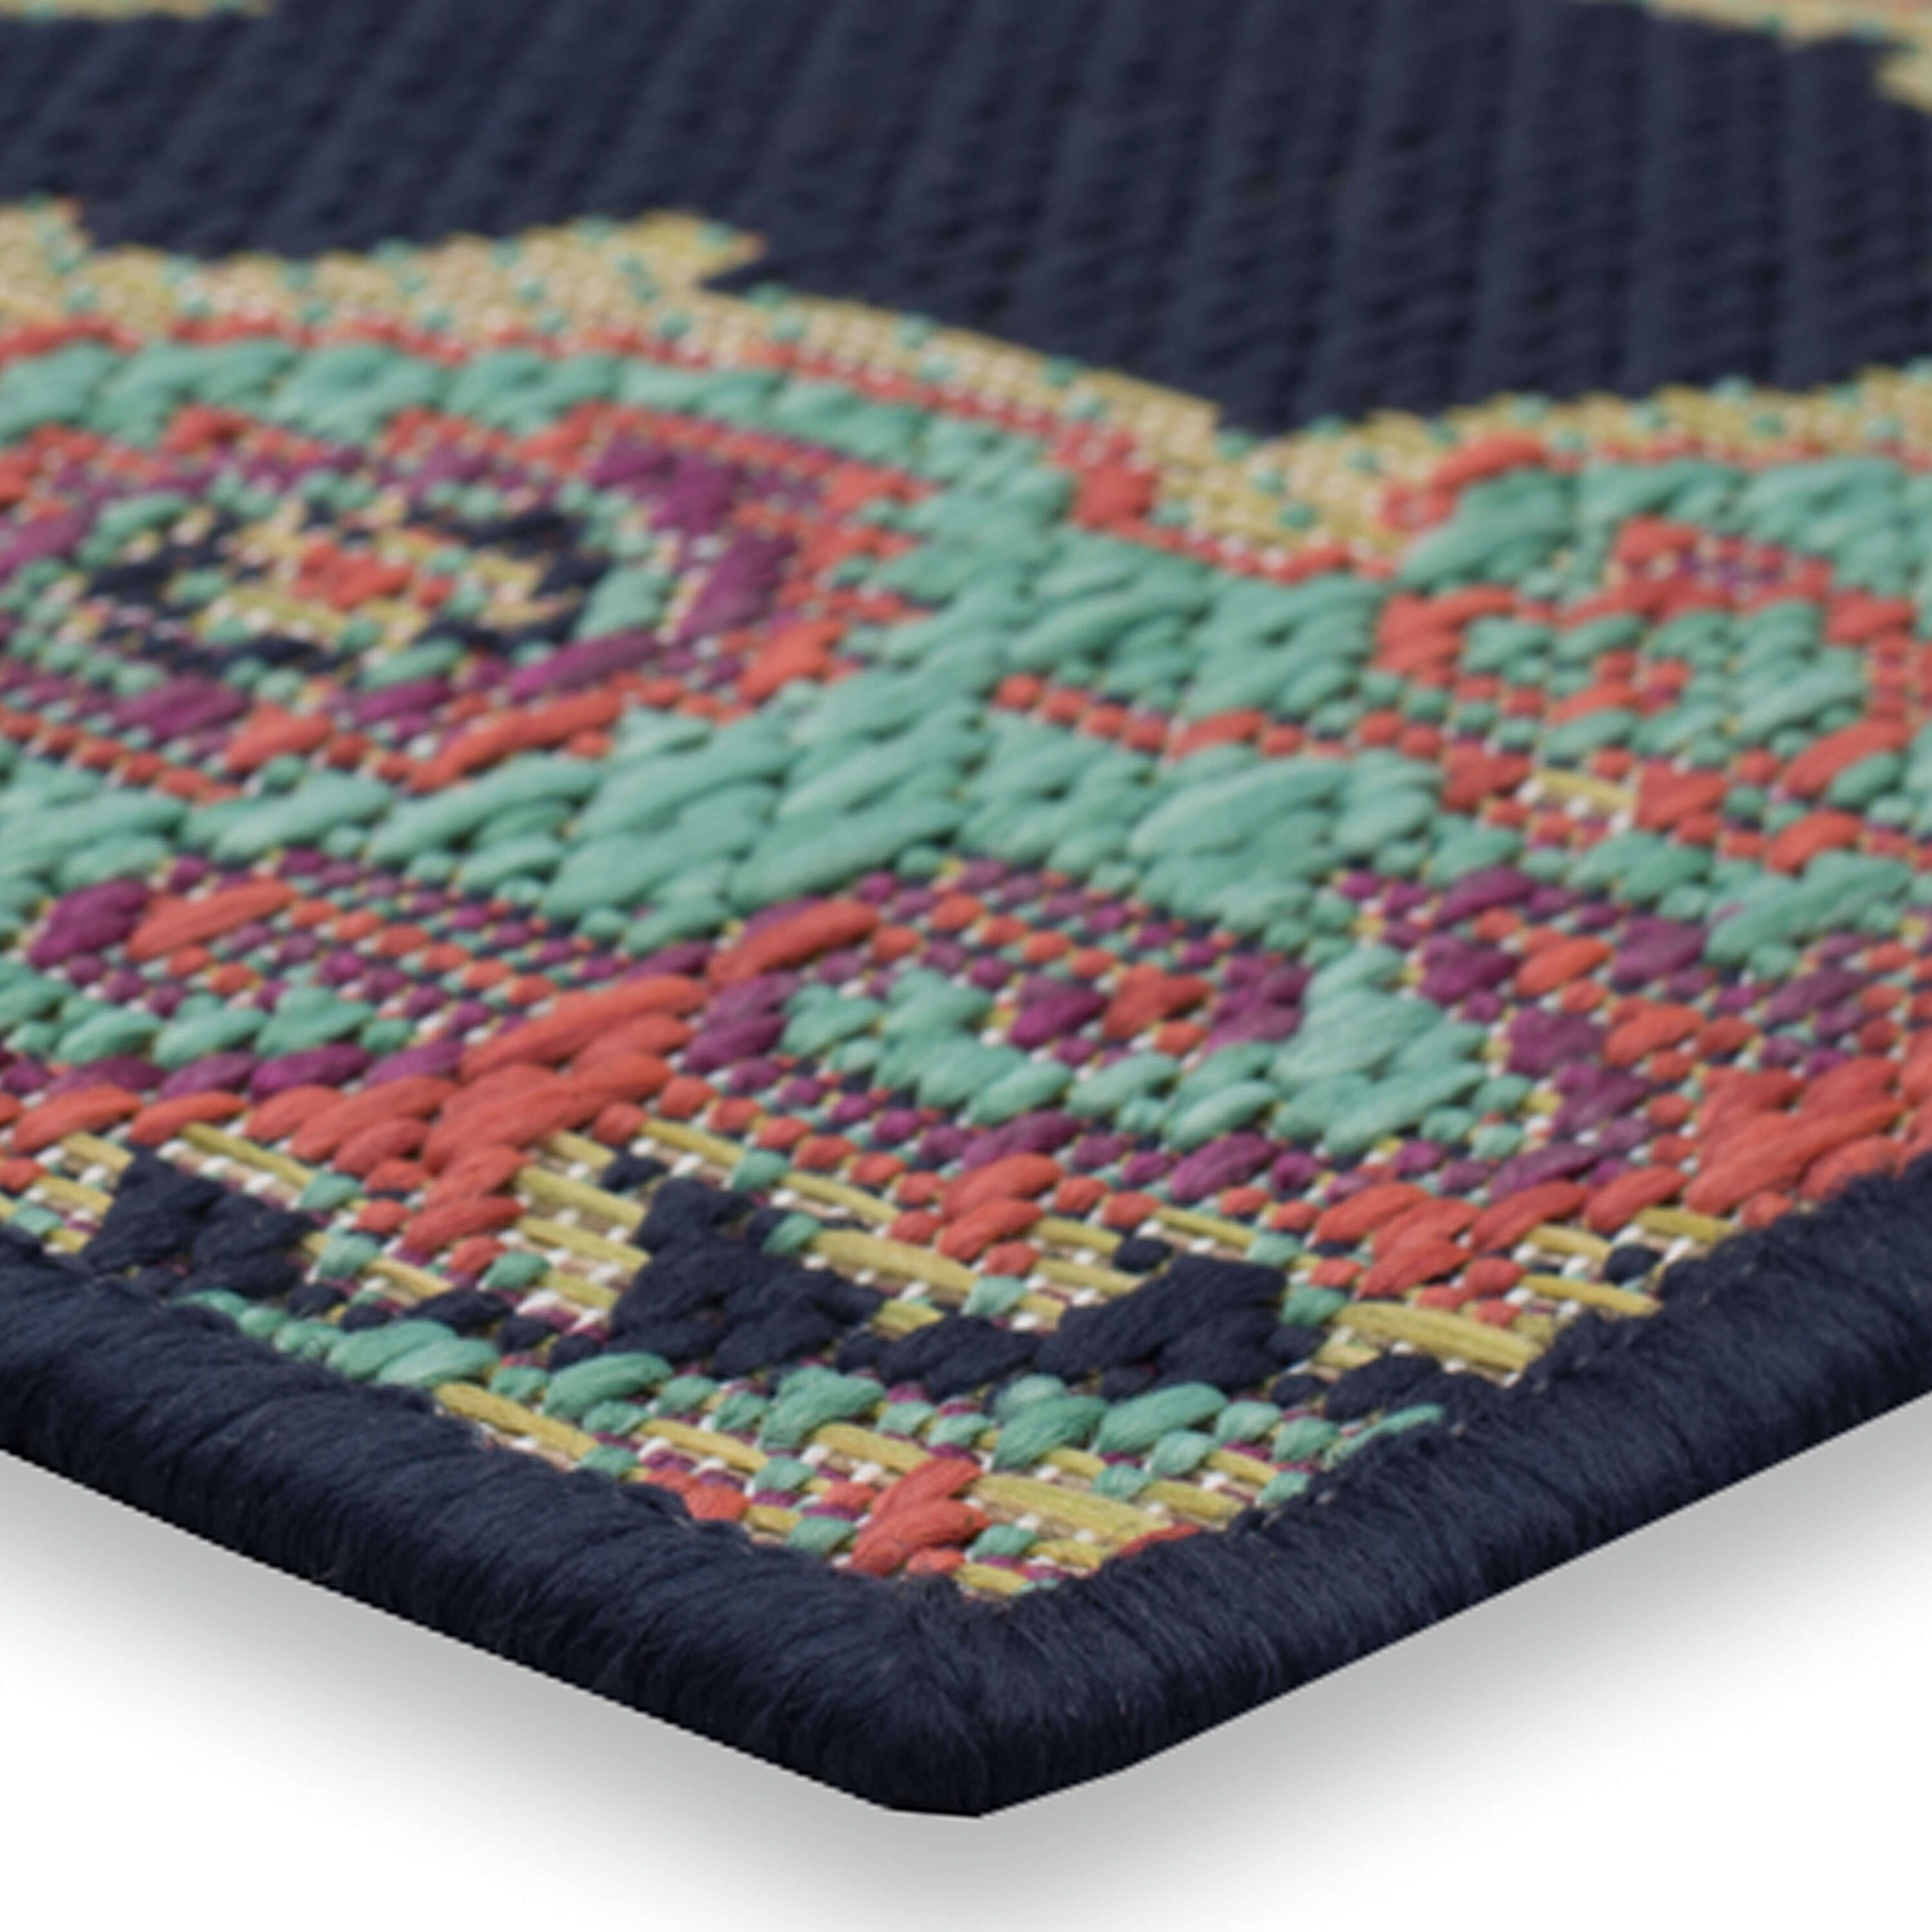 Can Outdoor Rugs Handle Water? – RUG SOLID